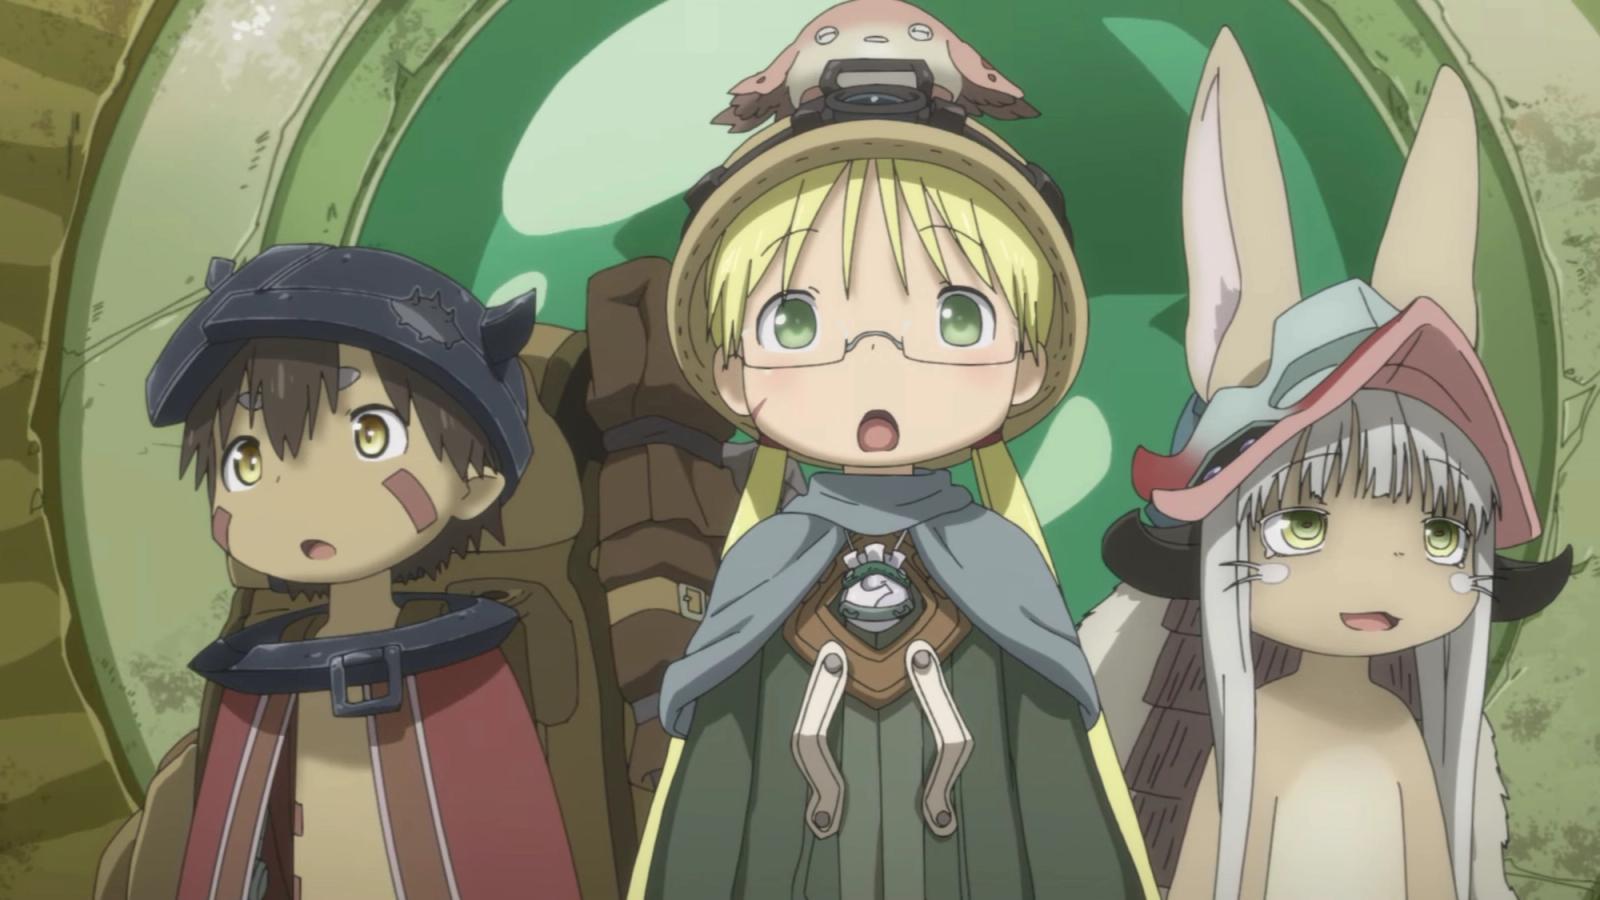 Where to Watch Made in Abyss Series and Movies: Crunchyroll, Netflix, Amazon Prime -Where Else Can I Watch Made in Abyss Season 2?